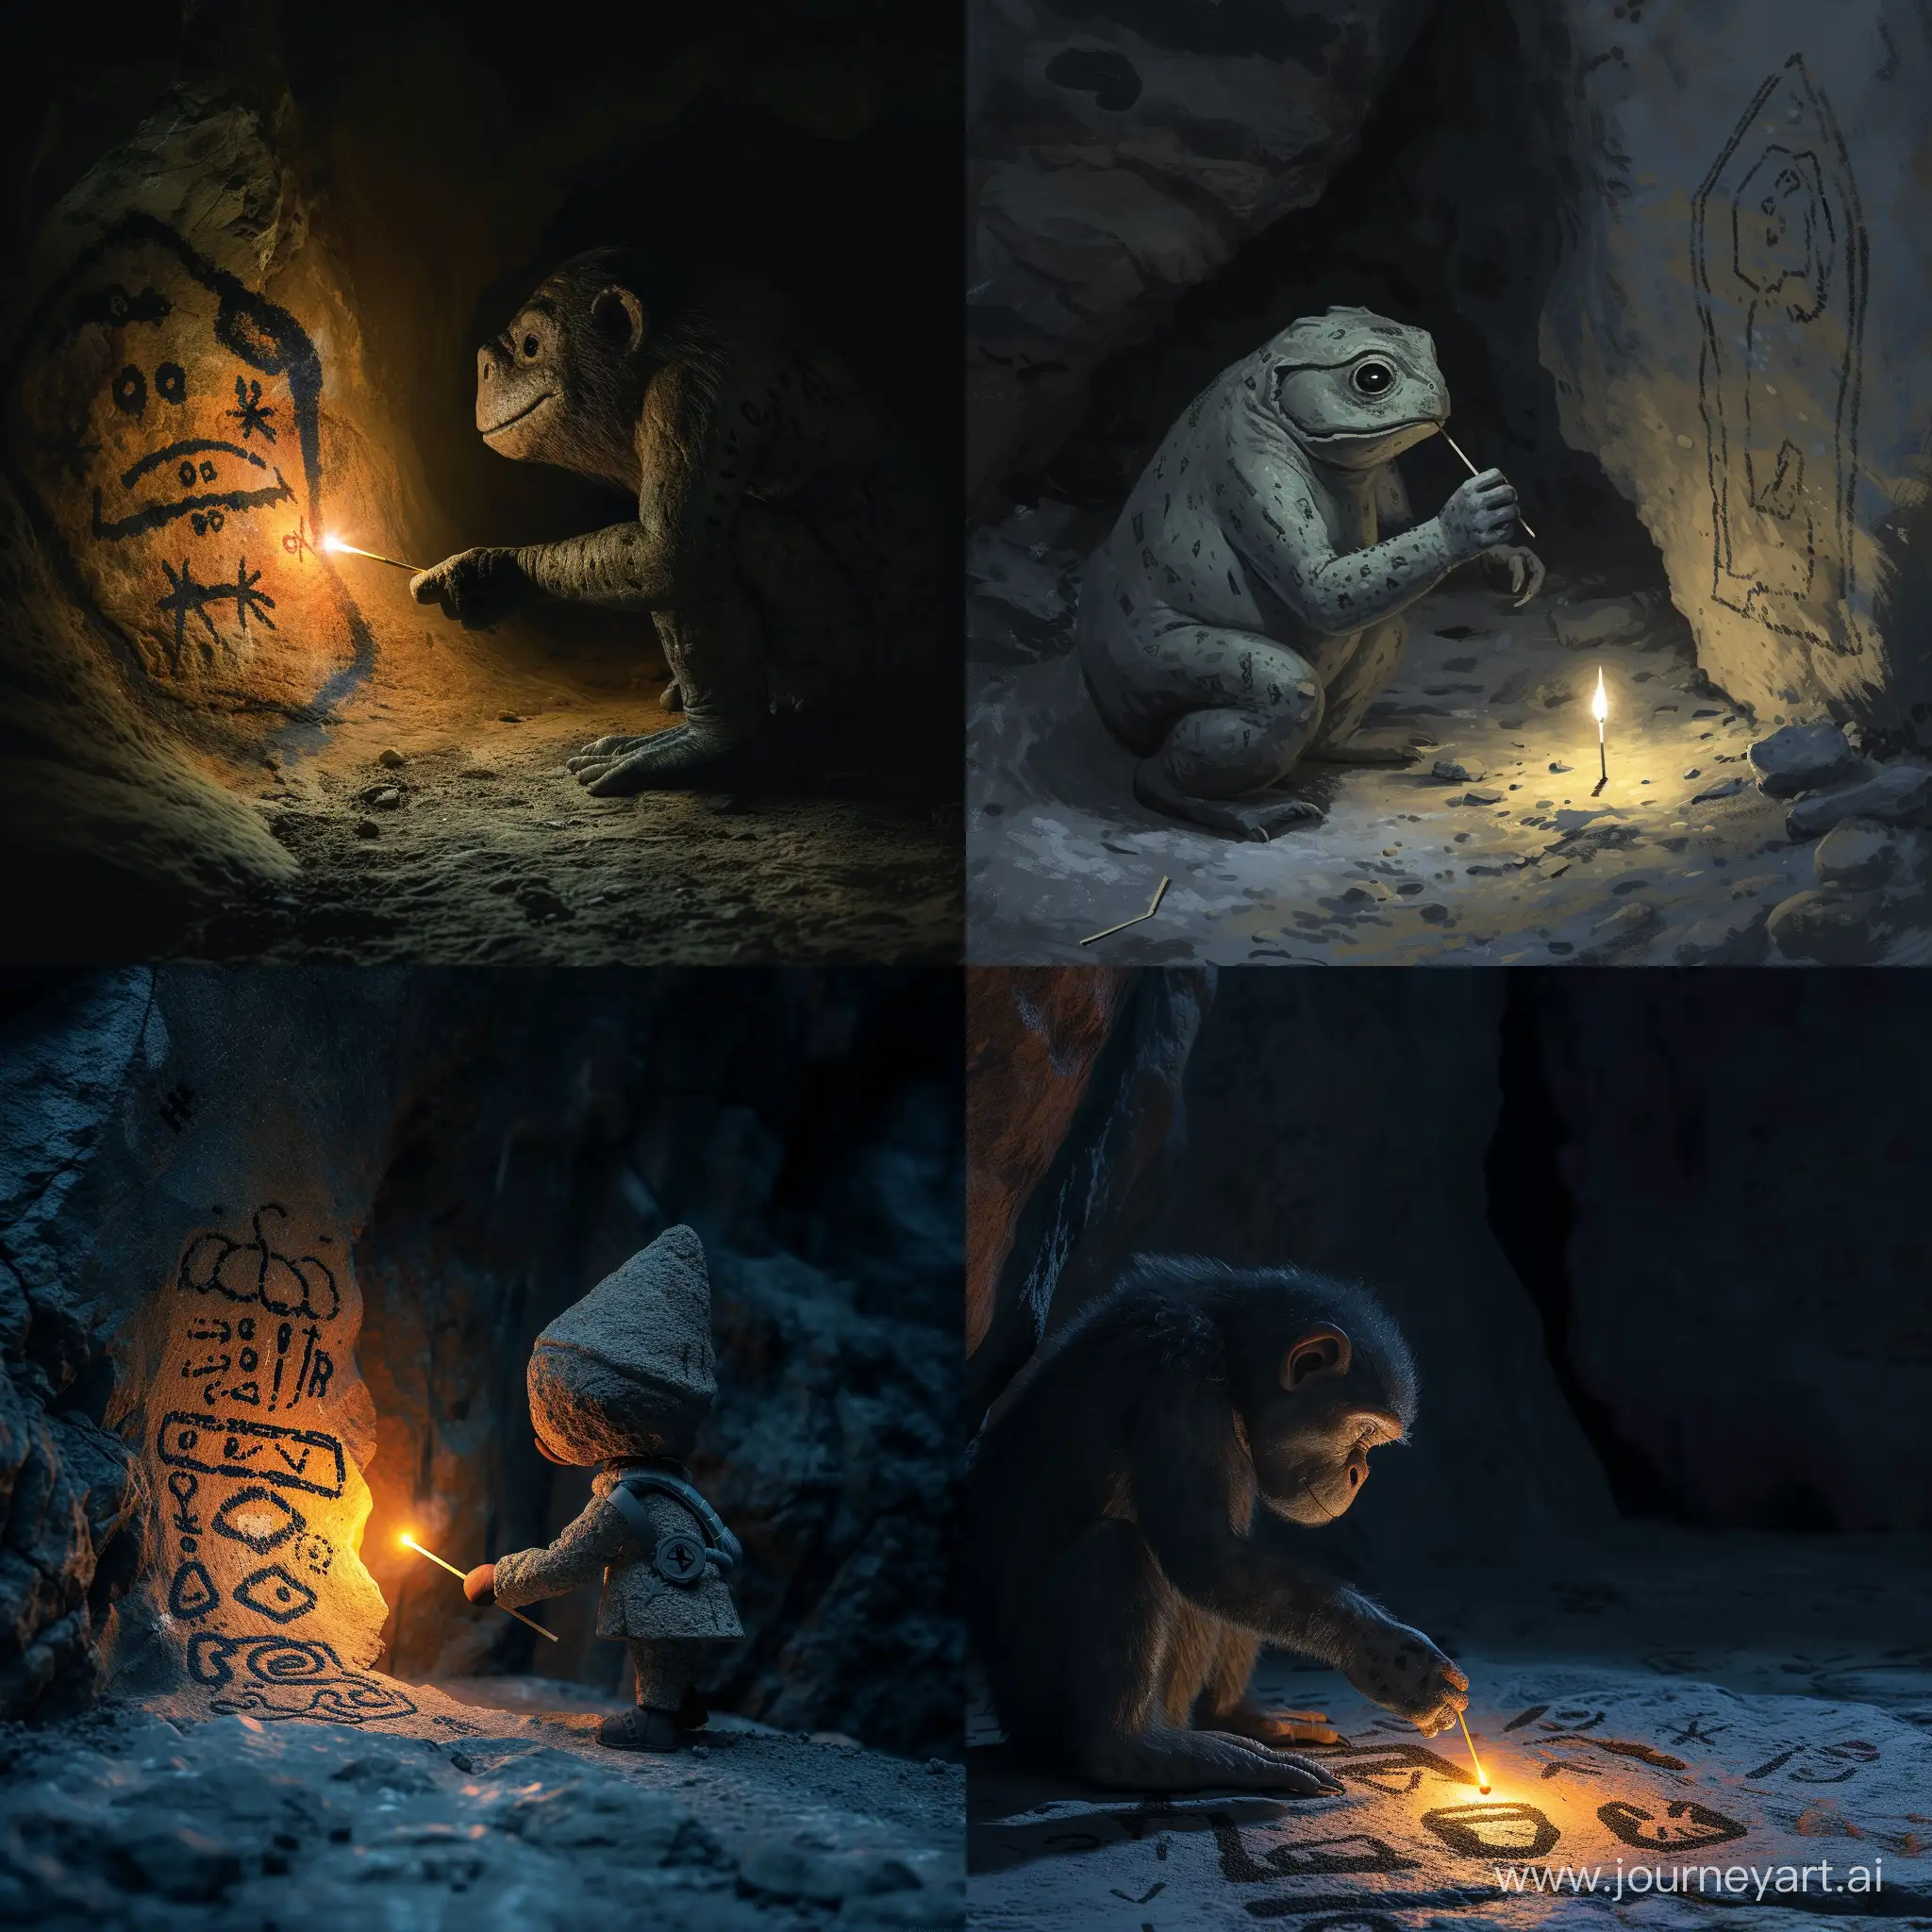 Realistic. Overweight BitBoy Crypto inspecting prehistoric cave art by match light in a dark cave.